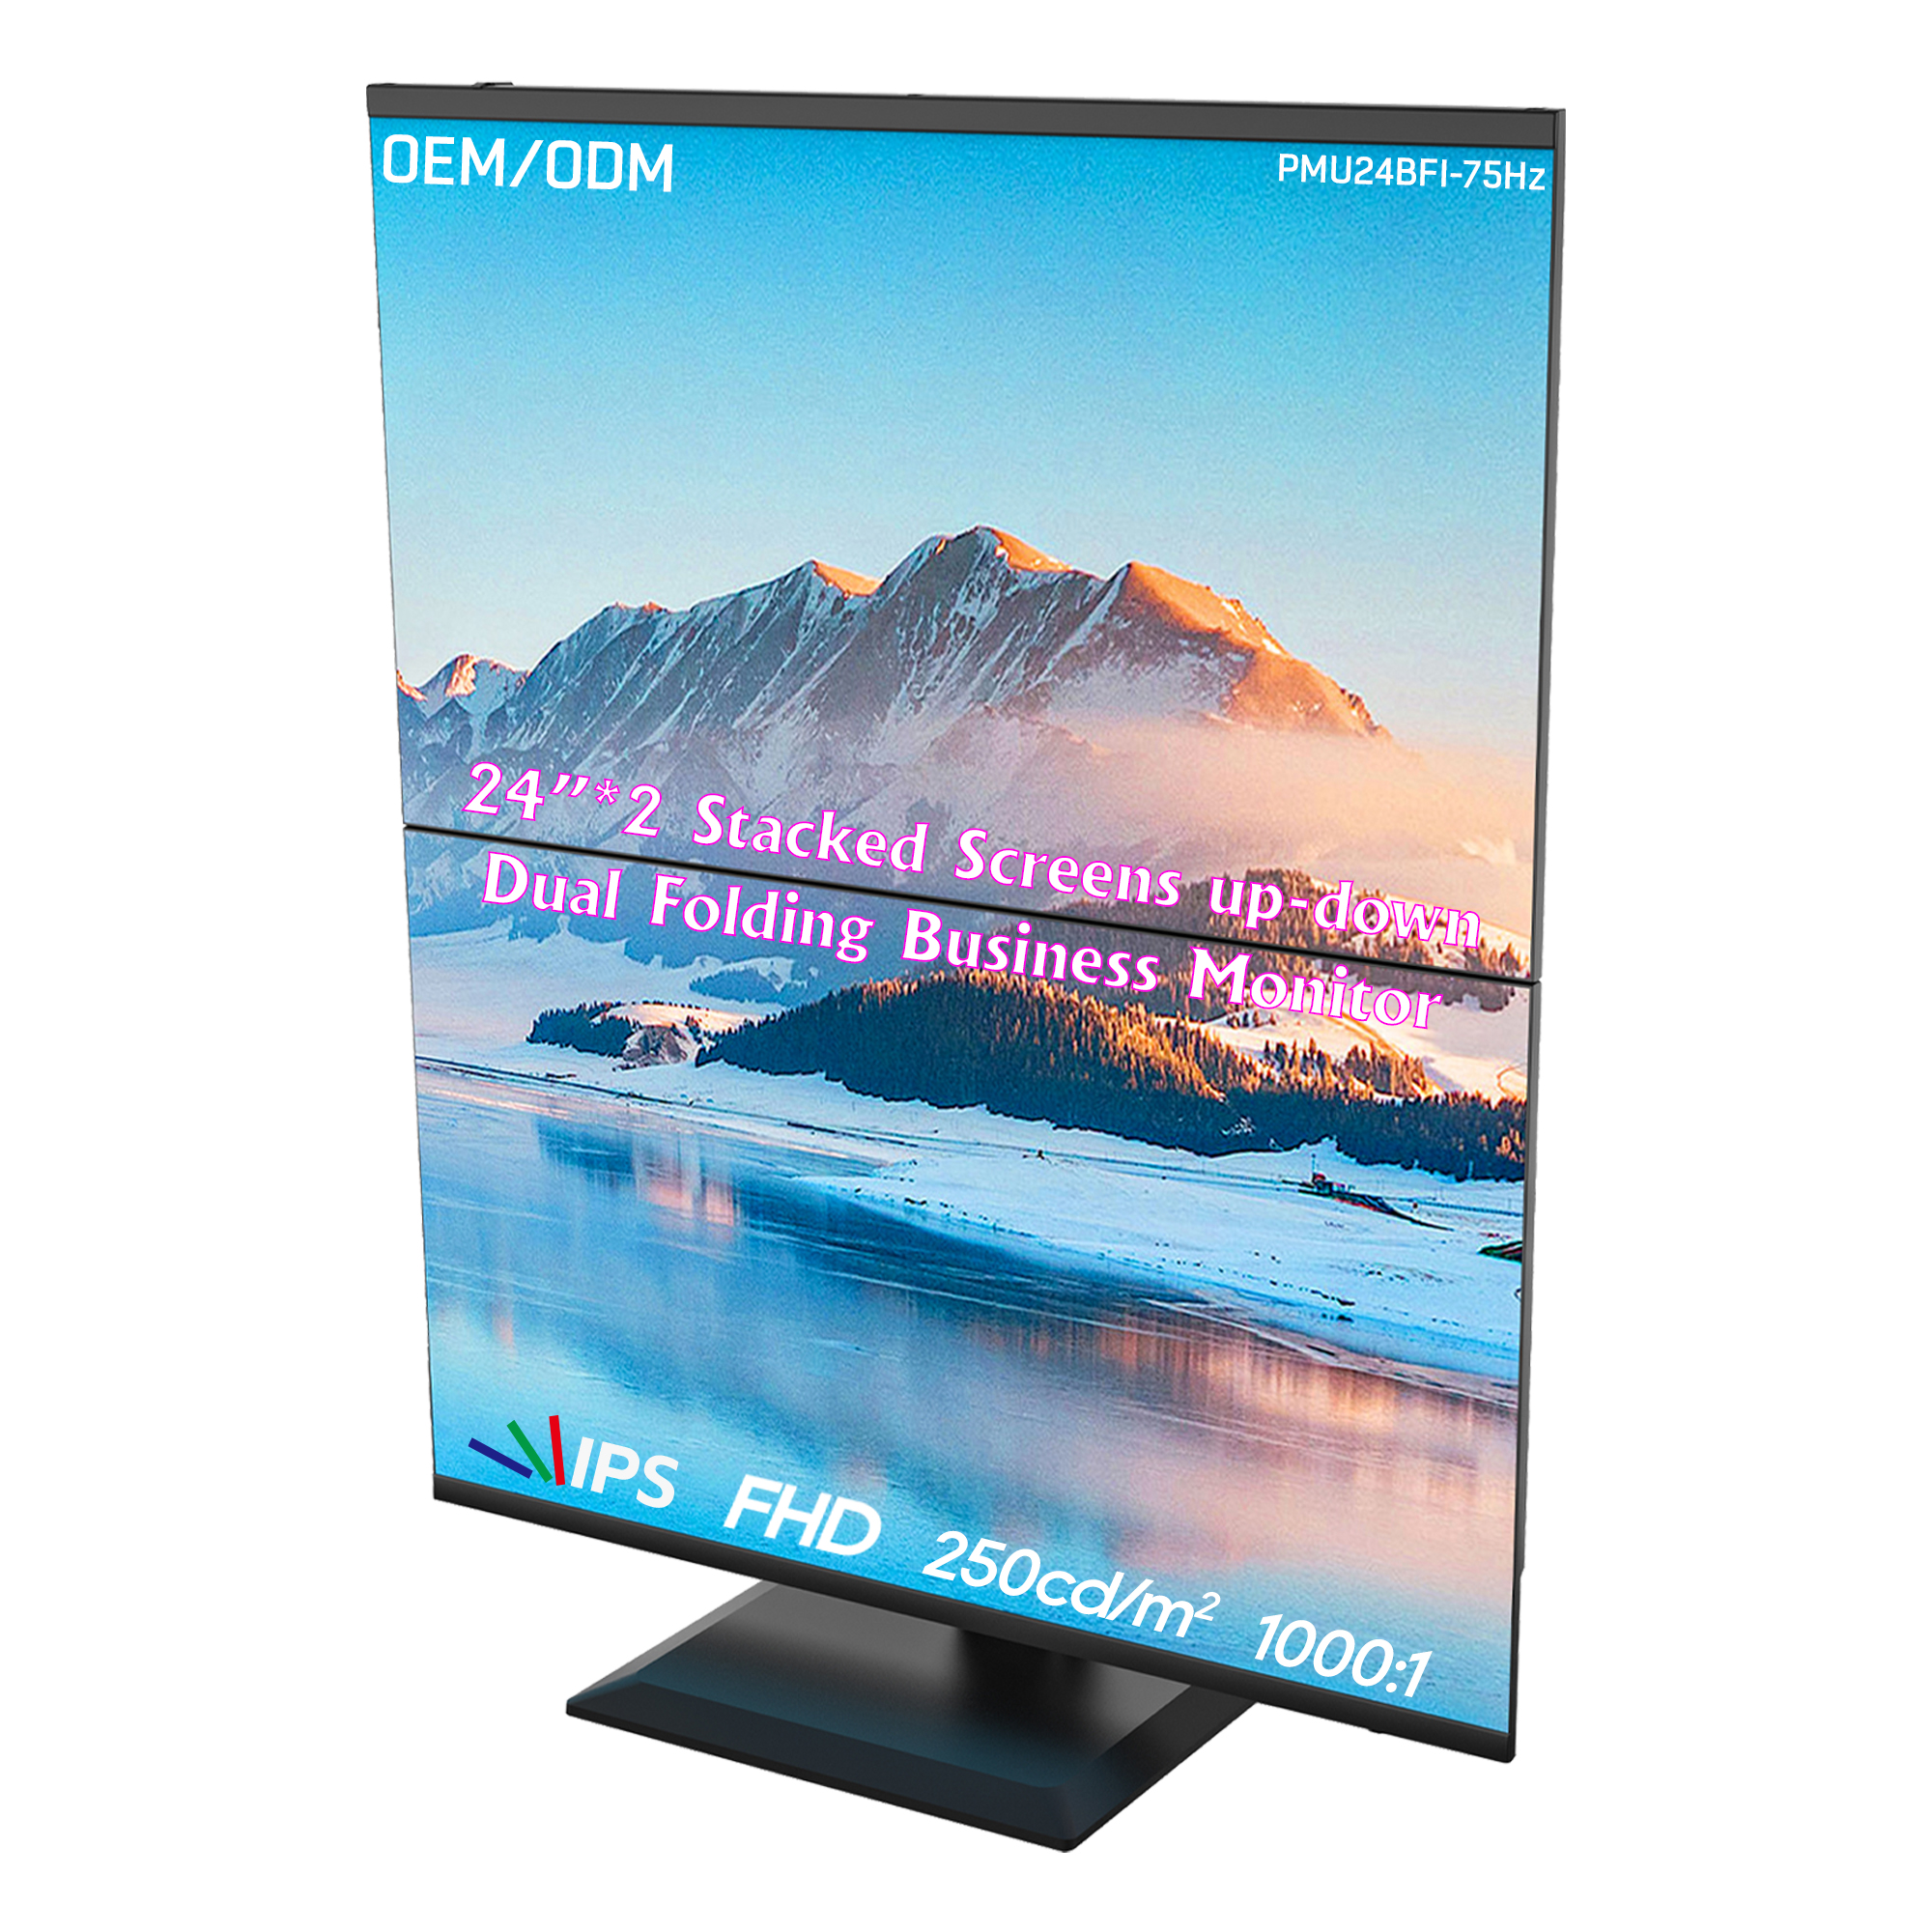 The era of “value competition” in LCD panel industry is coming